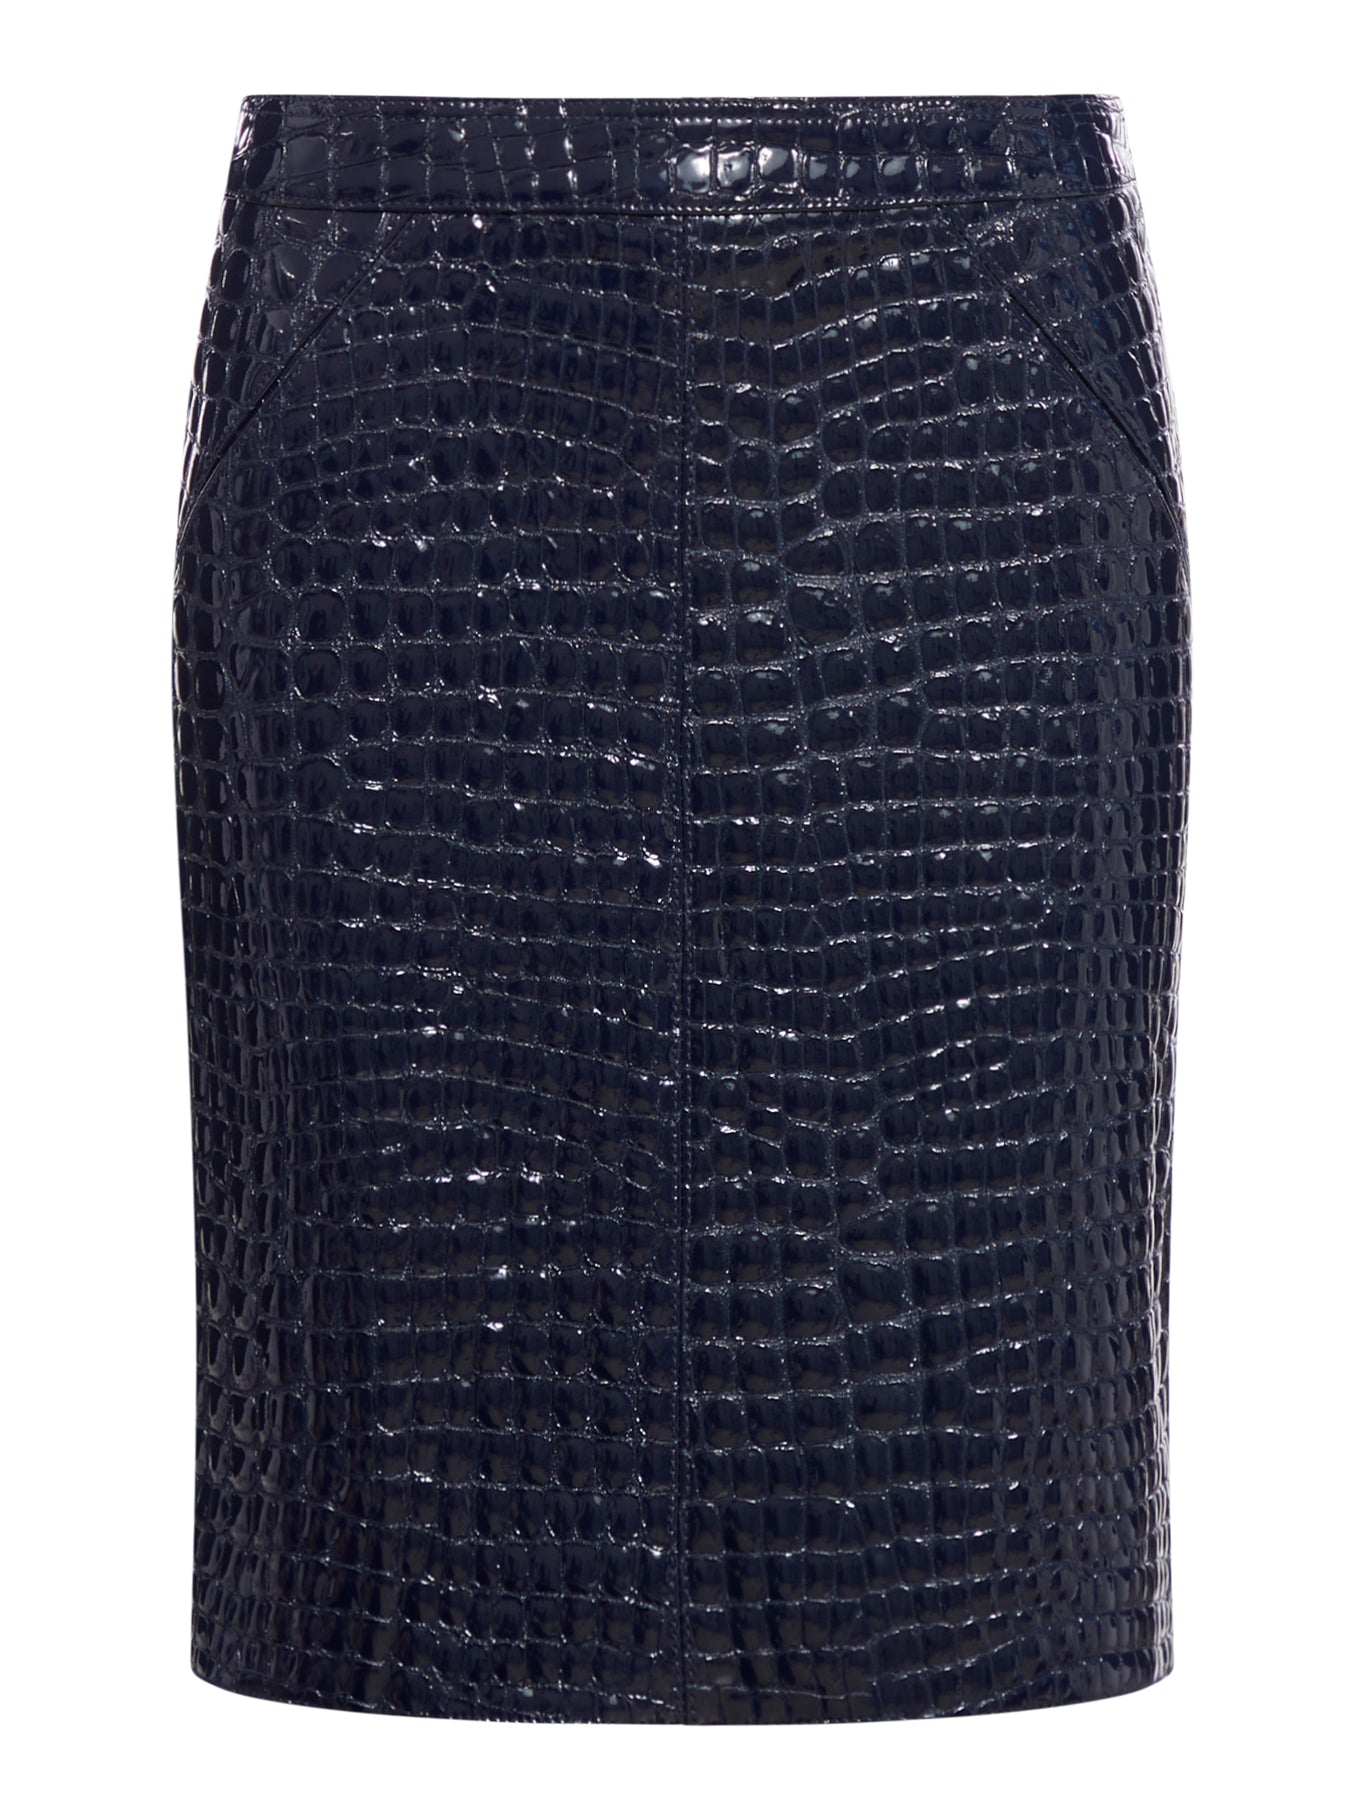 GLOSSY CROCO EMBOSSED GOAT LEATHER SKIRT